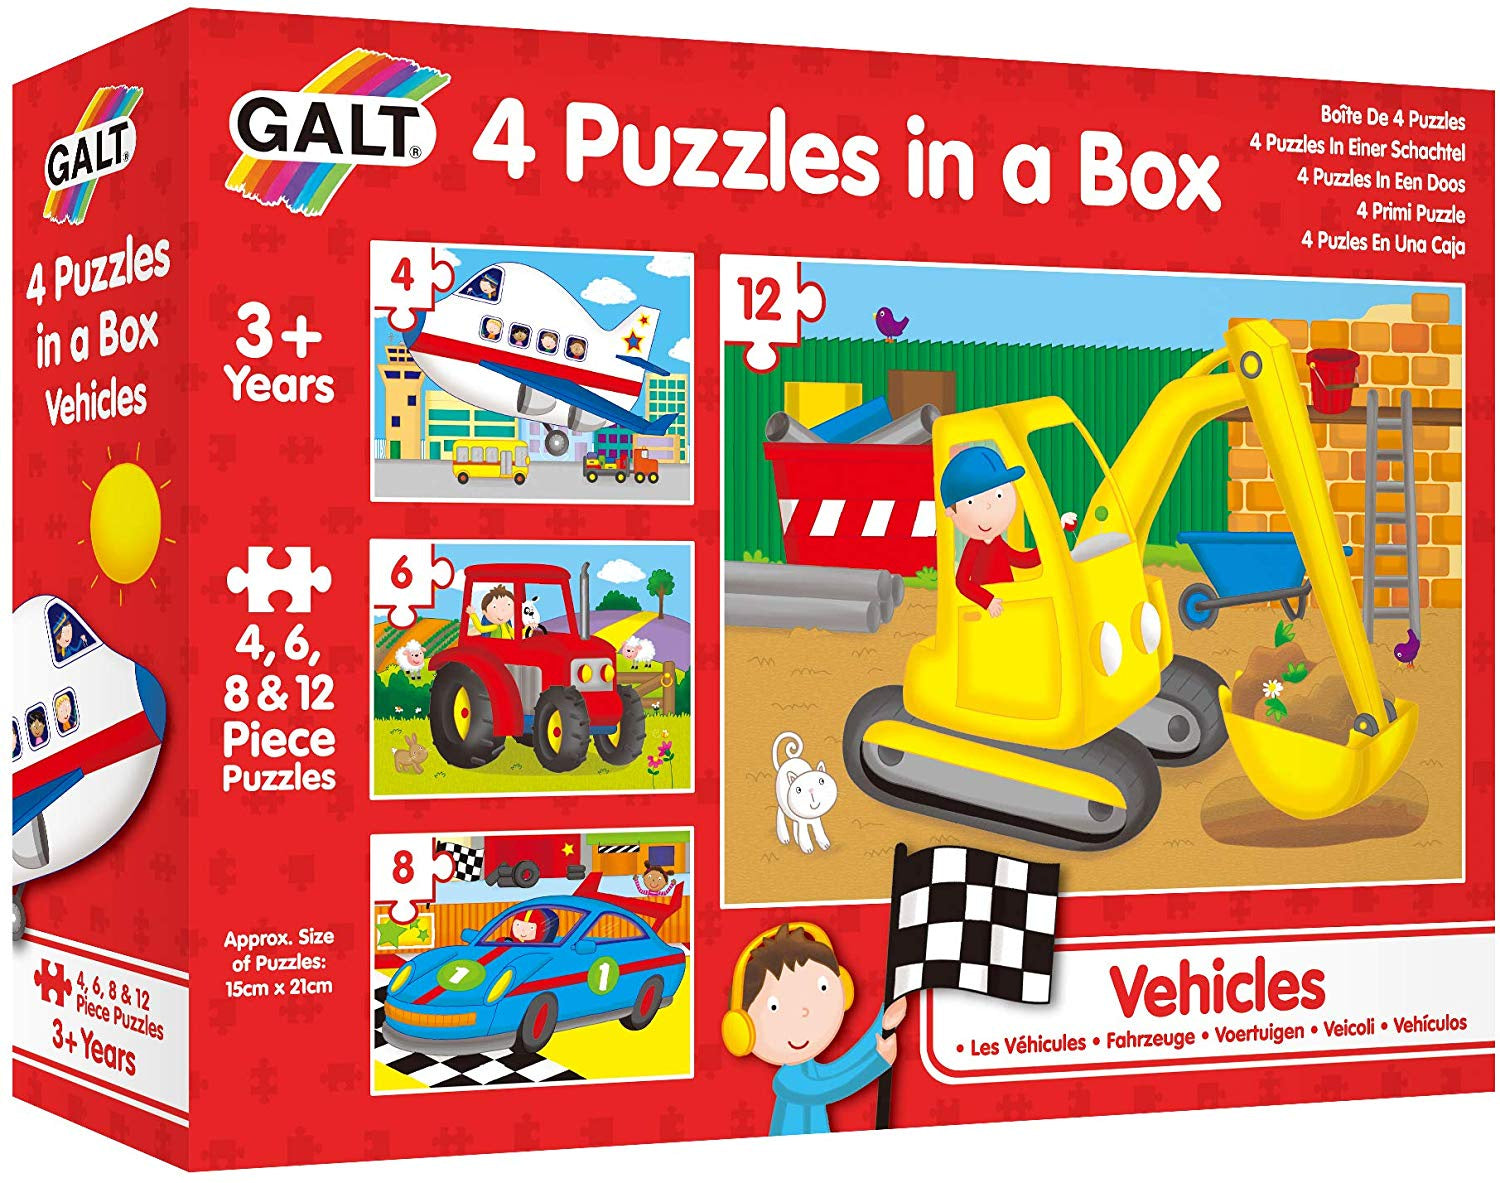 Galt 4 Puzzles In A Box Vehicles